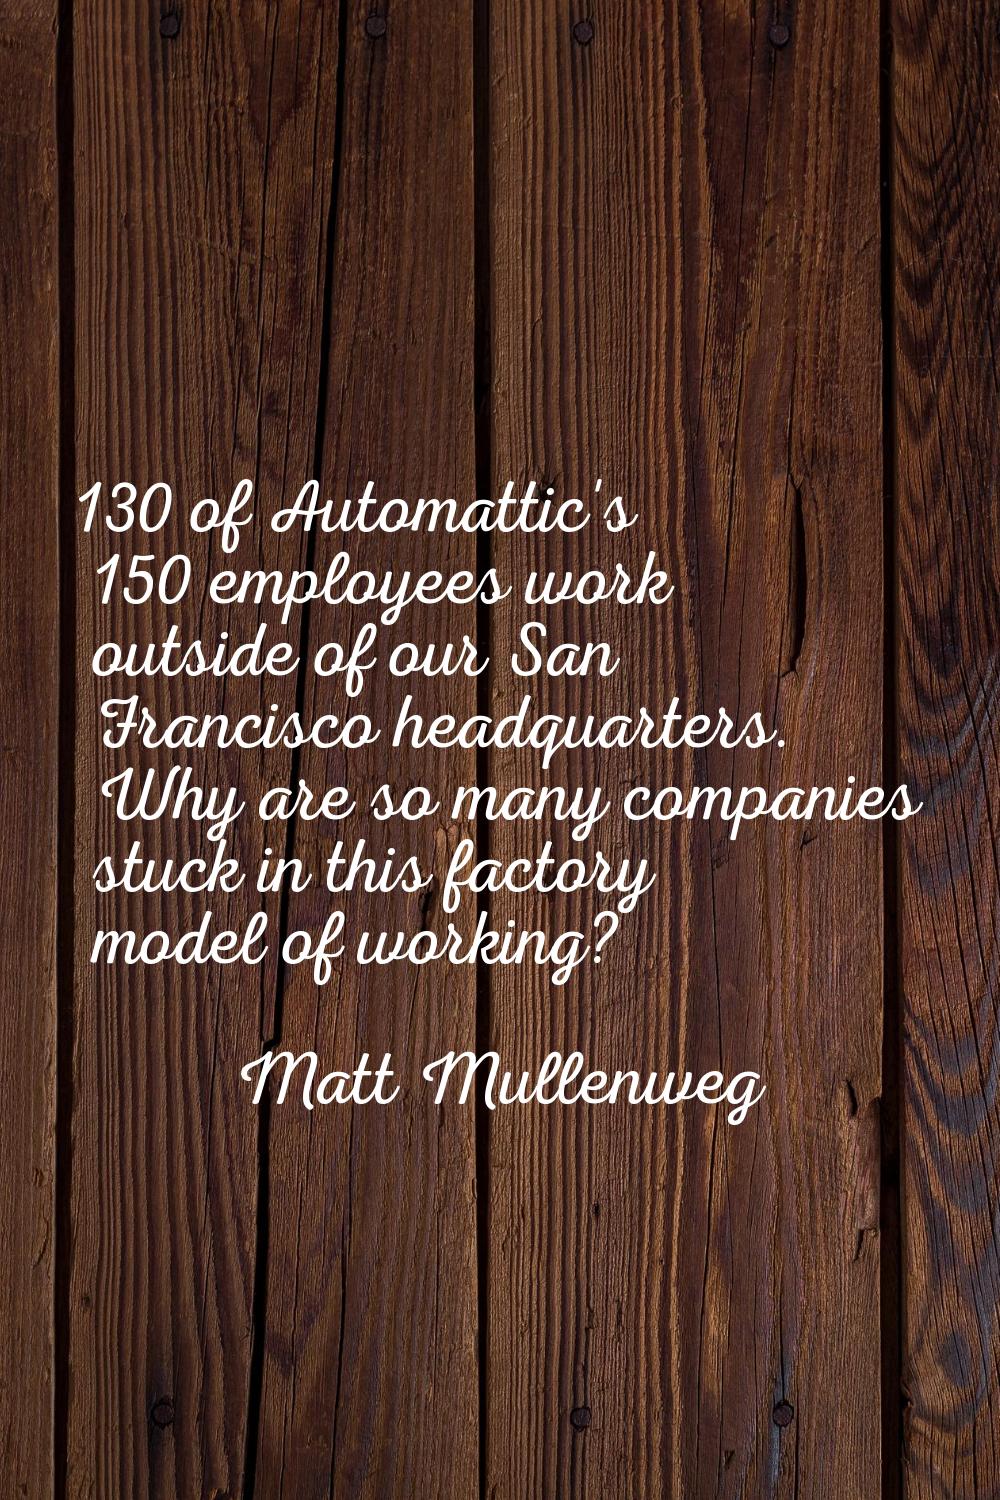 130 of Automattic's 150 employees work outside of our San Francisco headquarters. Why are so many c